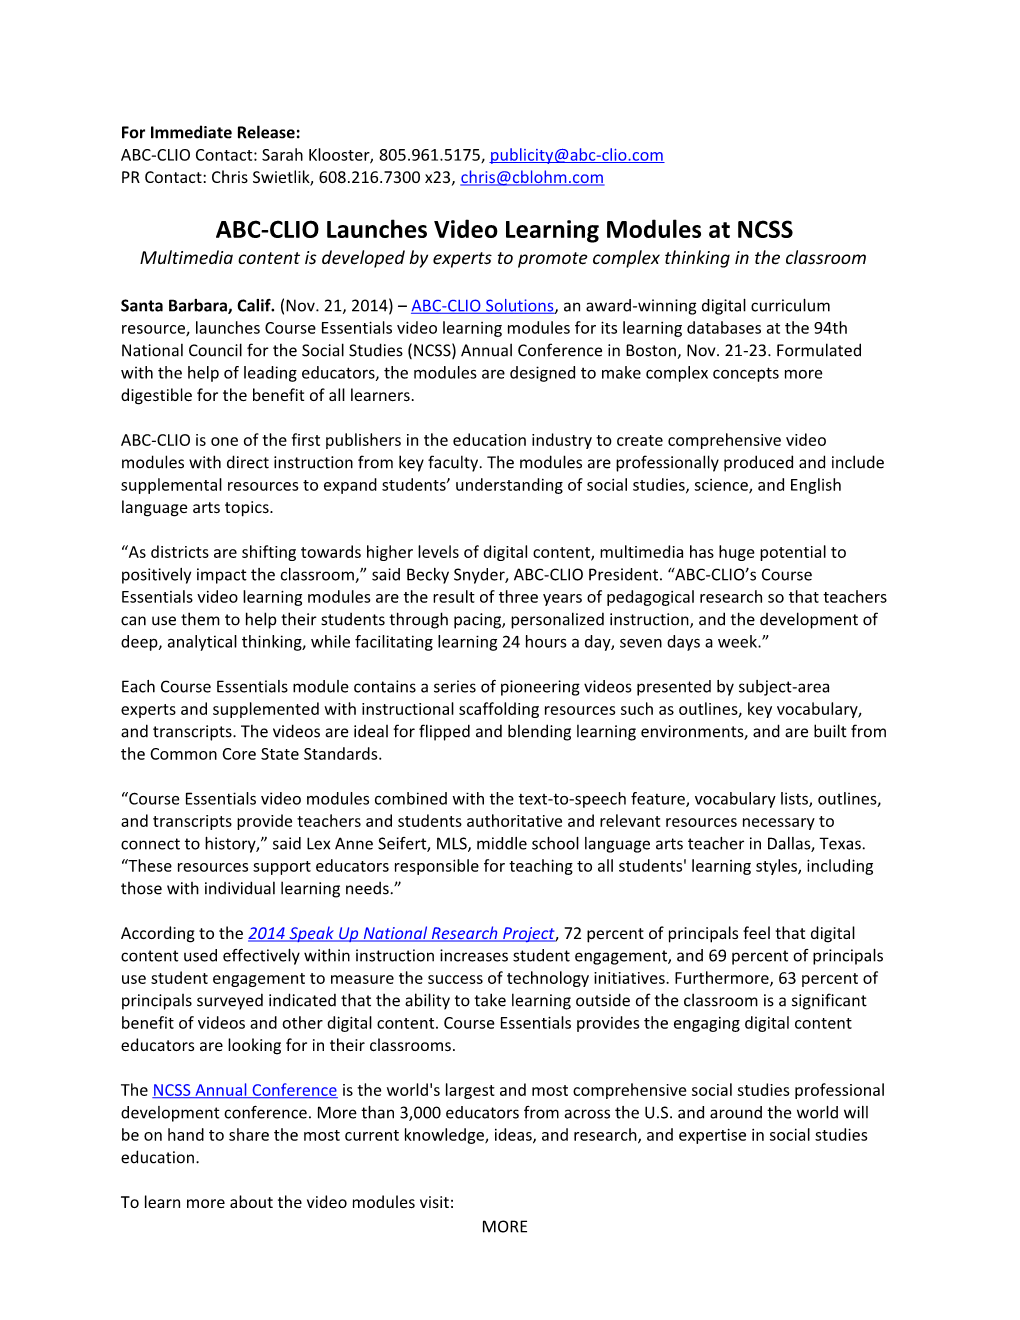 ABC-CLIO Launches Video Learning Modules at NCSS